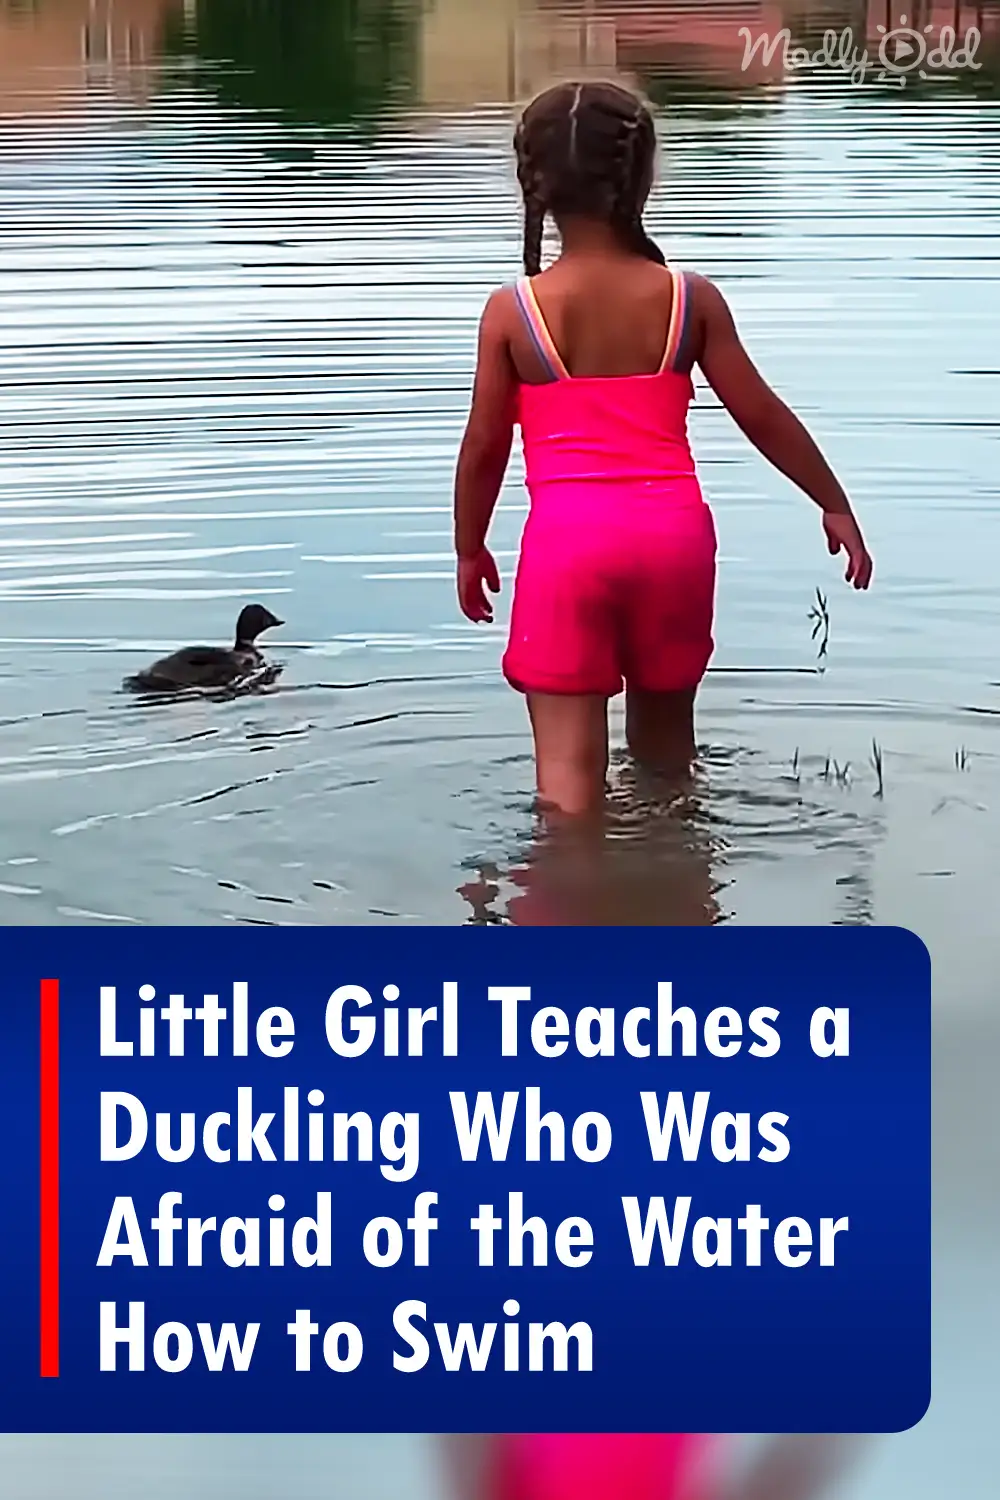 Little Girl Teaches a Duckling Who Was Afraid of the Water How to Swim